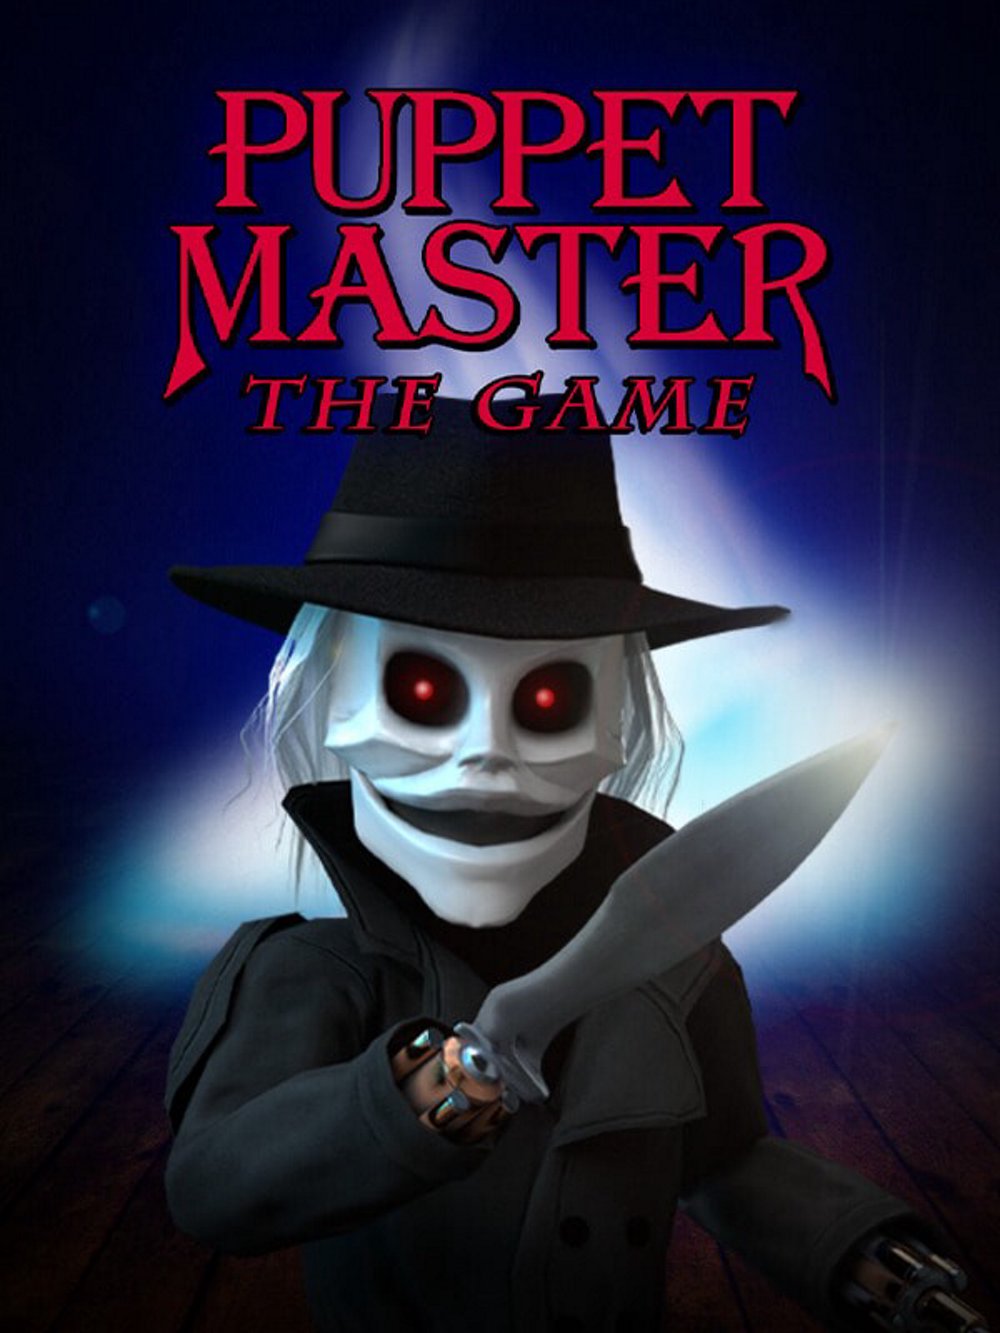 Puppet Master Complete - by Nat Brehmer (Paperback)